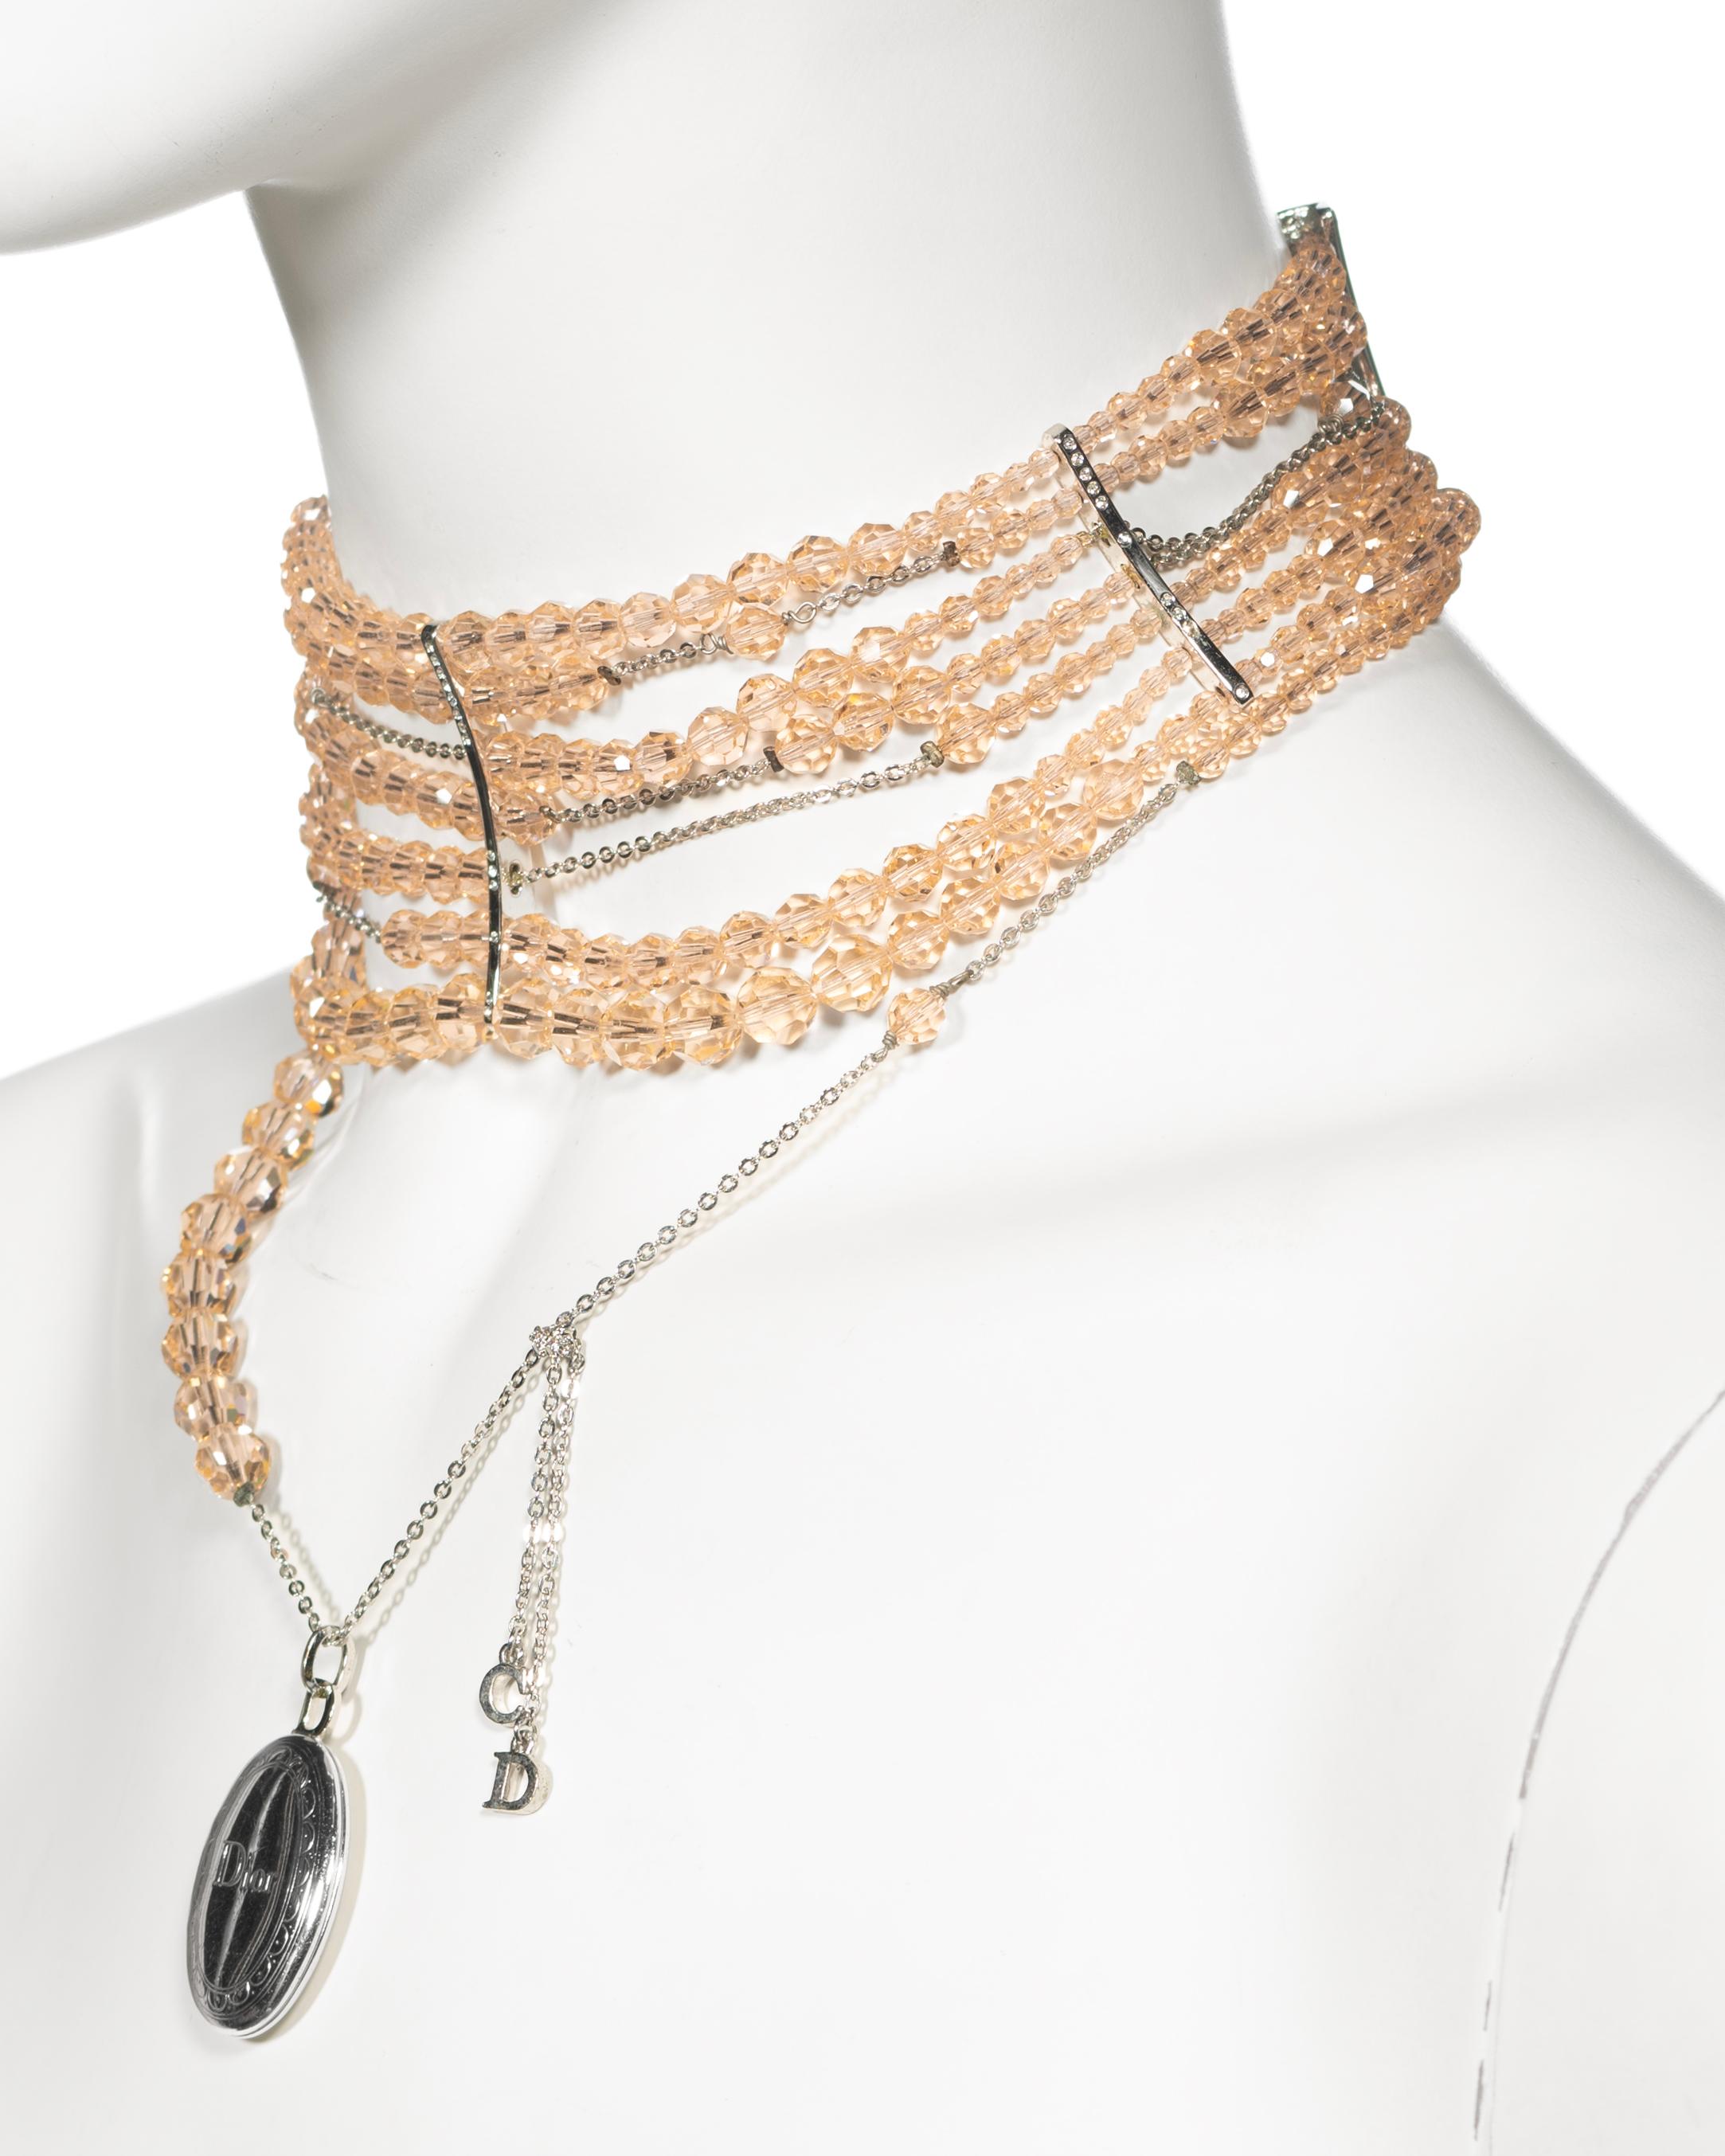 Christian Dior by John Galliano Distressed Peach Bead Choker Necklace, c. 2004 For Sale 6